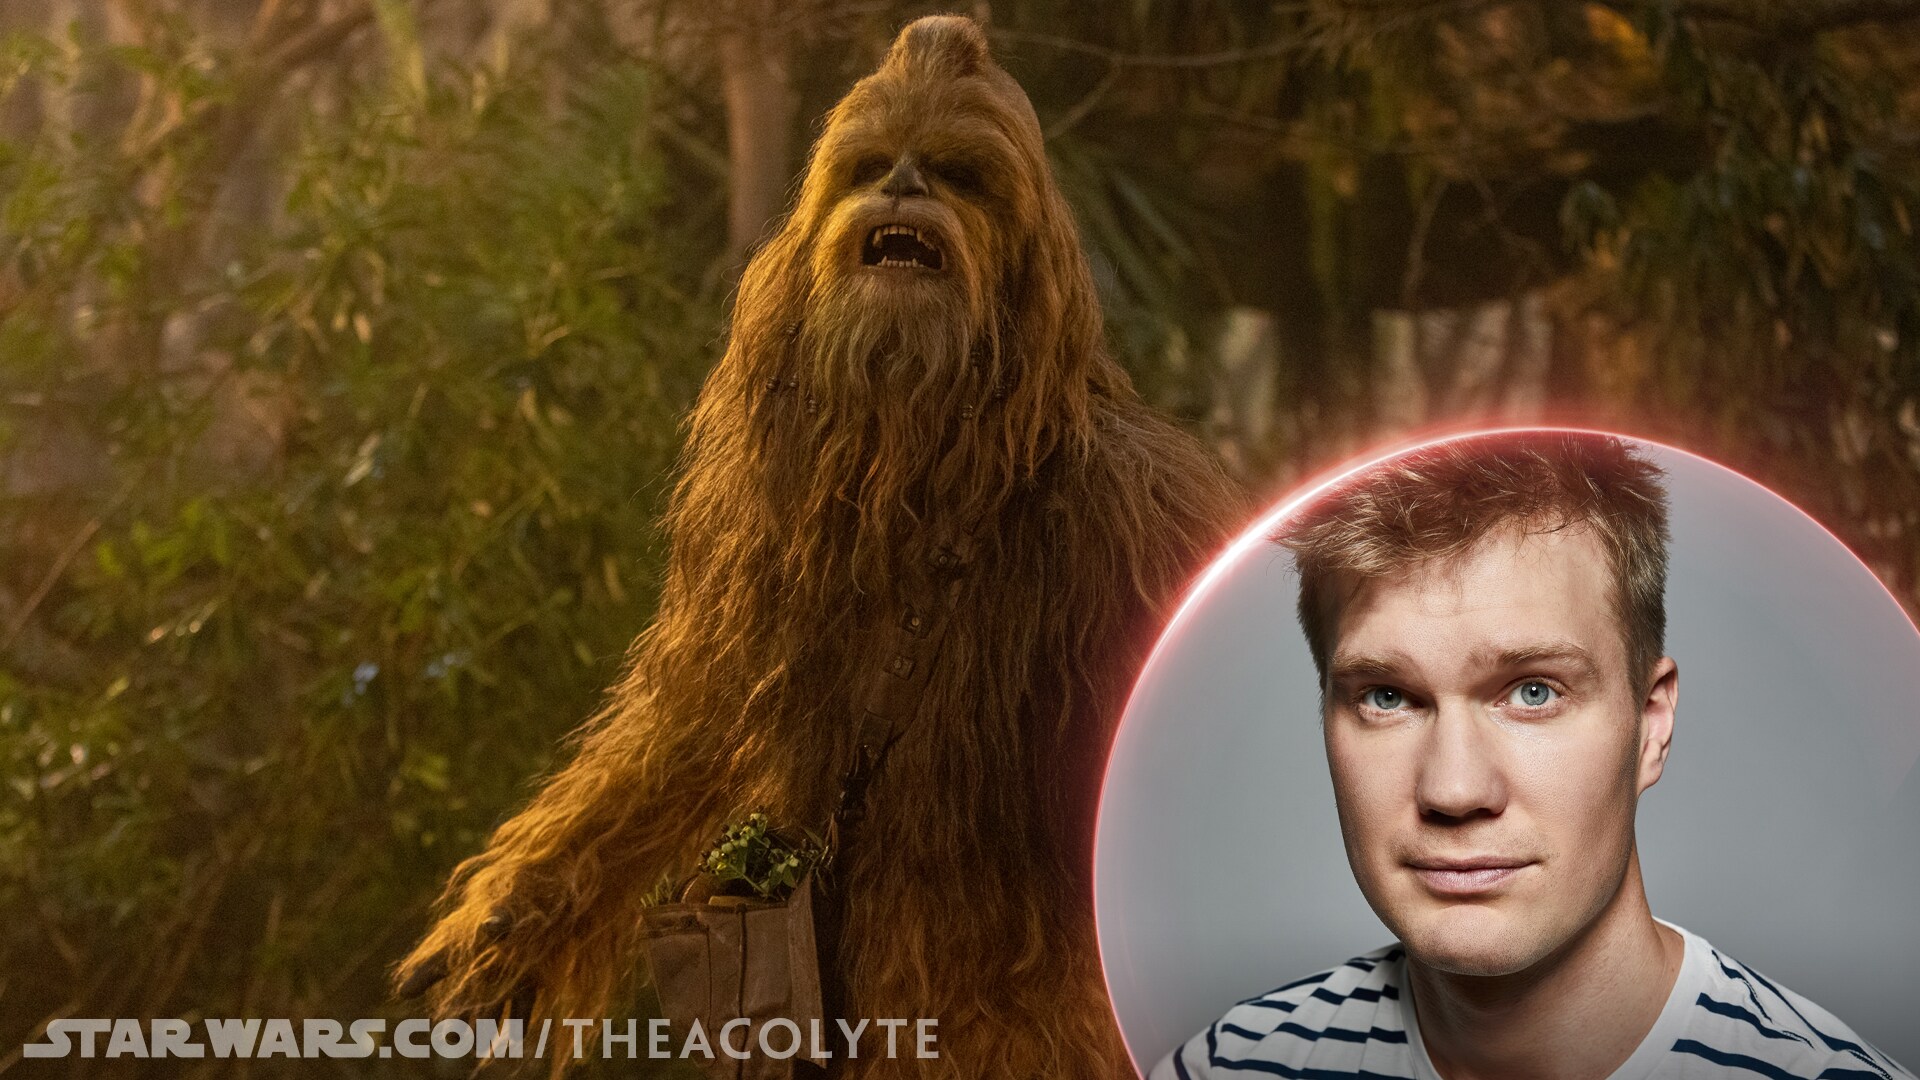 Kelnacca the Wookiee is played by Joonas Suotamo, the 6'11" actor who also played Chewbacca in th...